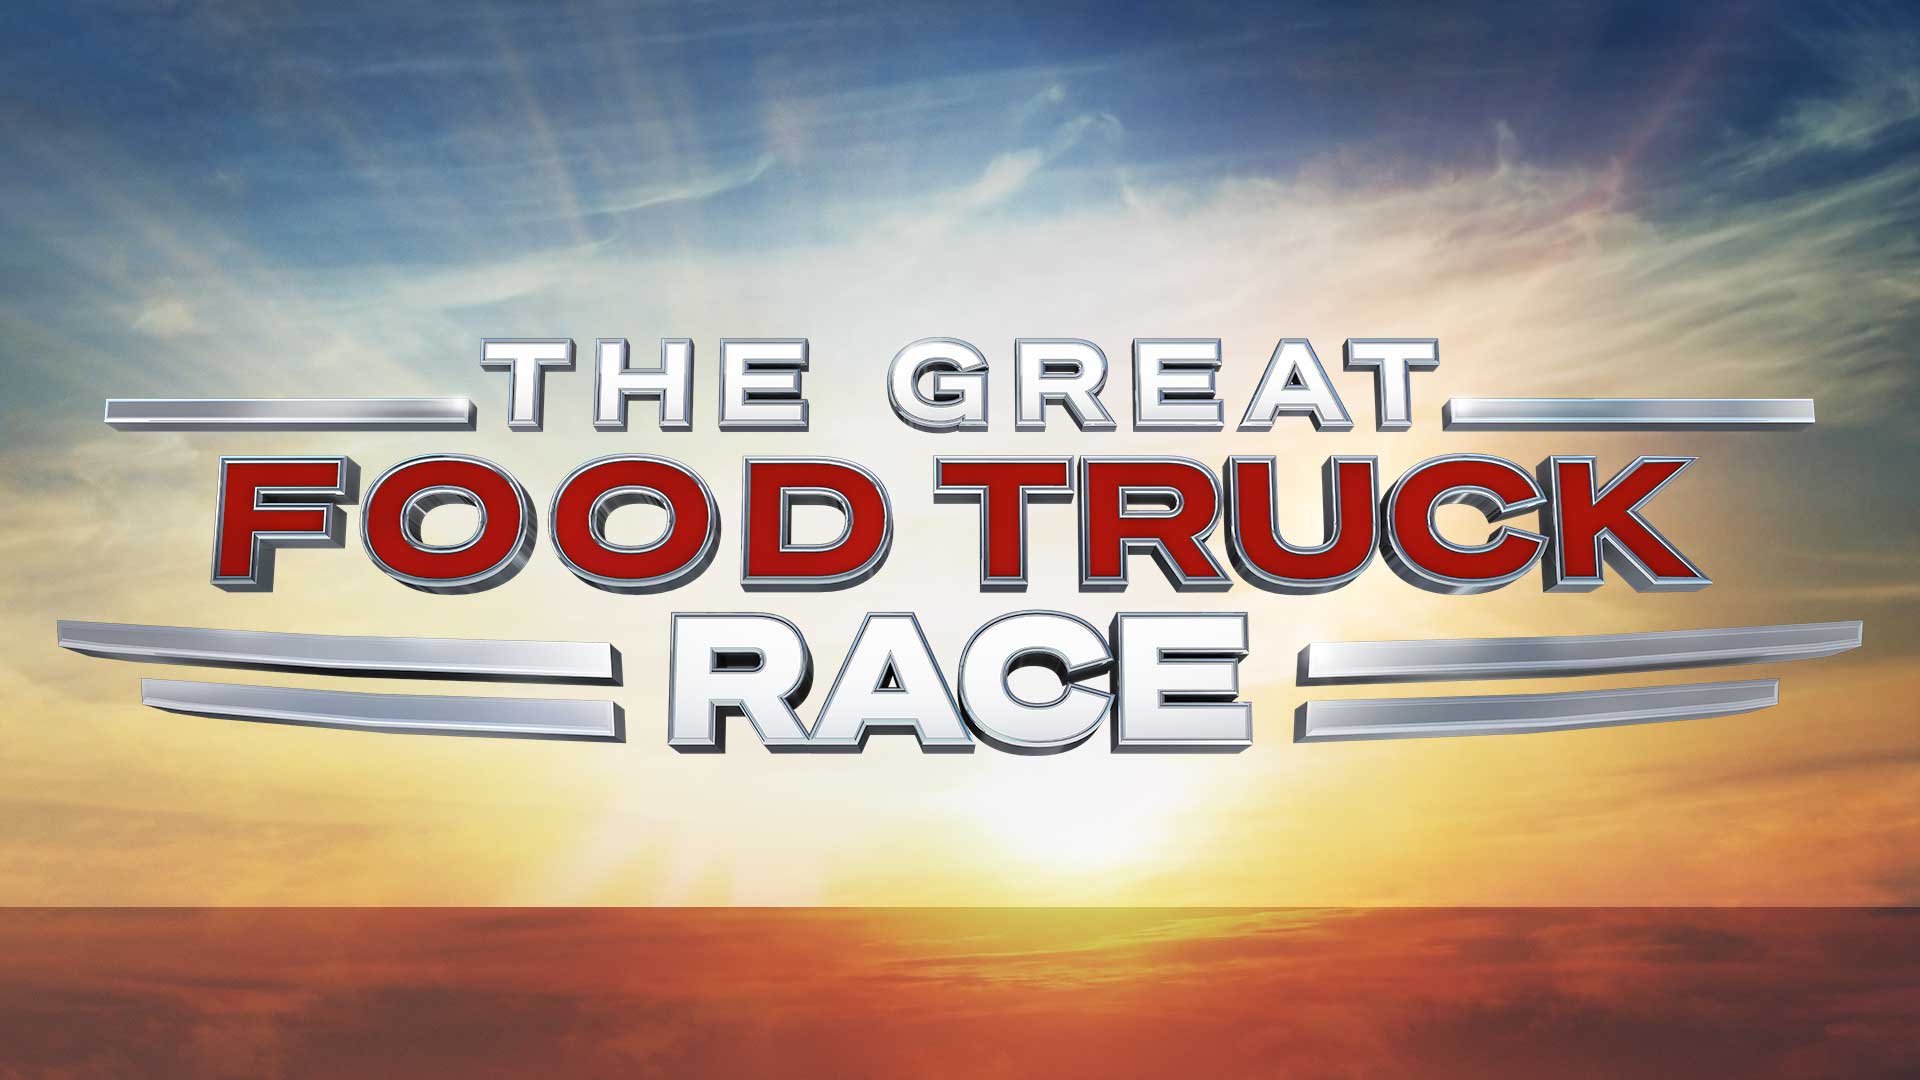 Great Food Truck Race 2014 Spoilers The Race Begins Tonight! (PHOTOS